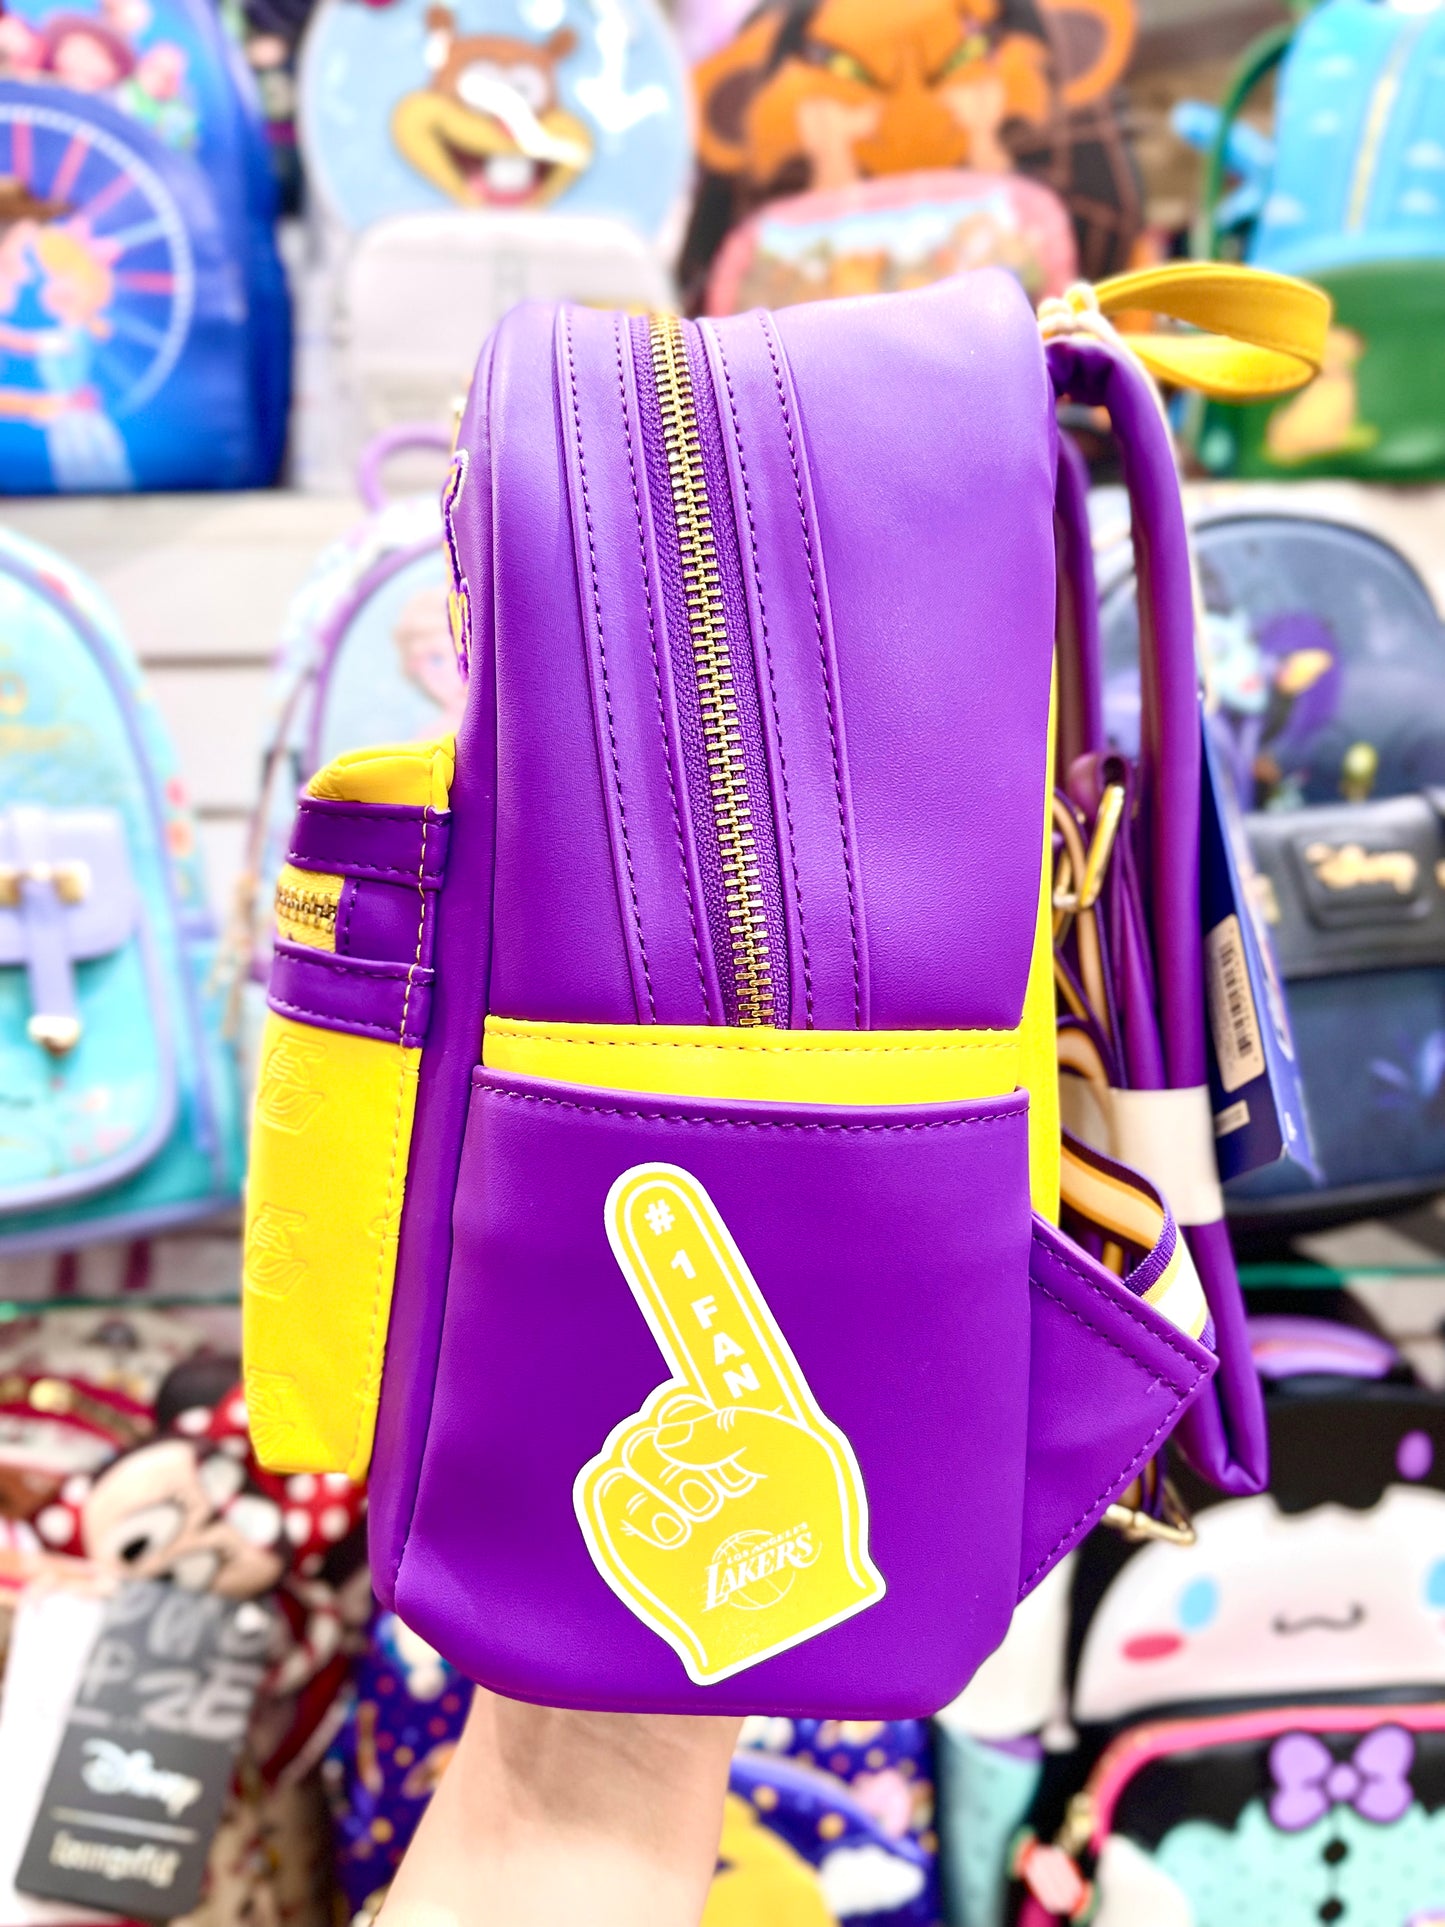 NBA Los Angeles Lakers Loungefly Backpack LFY